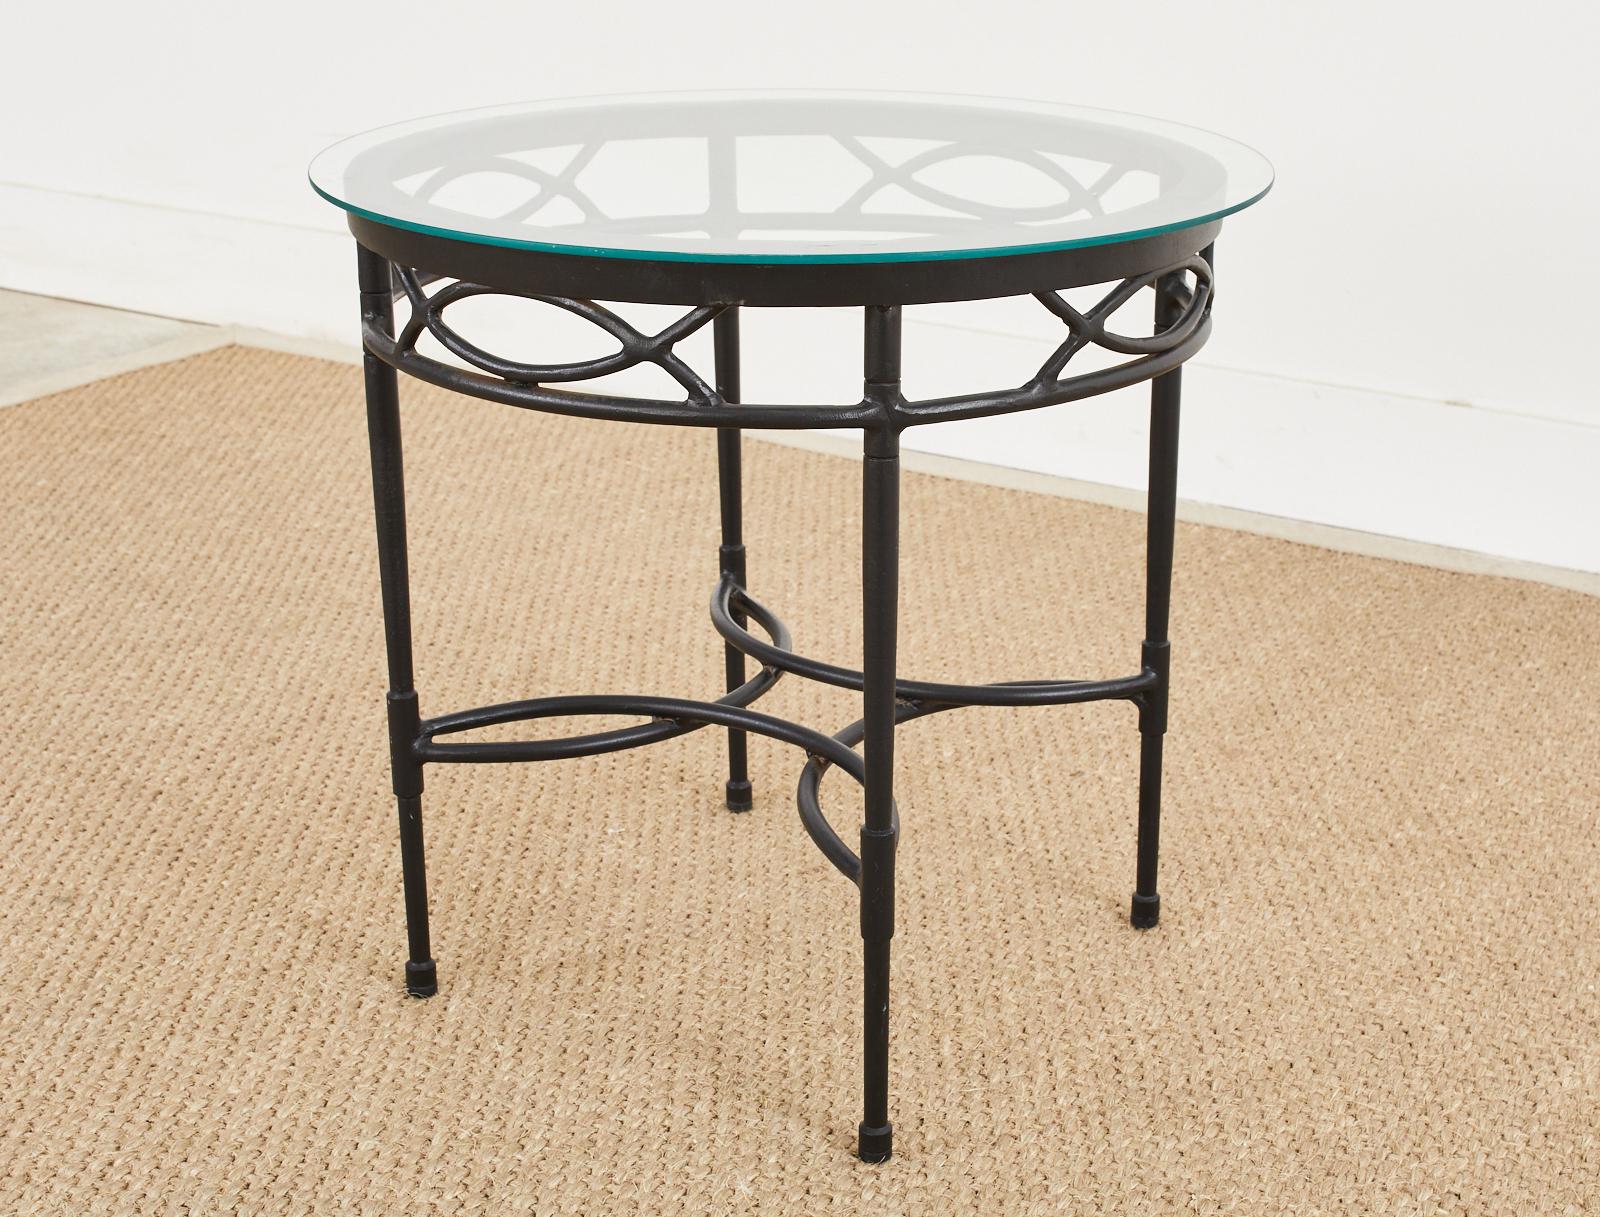 Powder-Coated Mario Papperzini for Salterini Style Patio Garden Drinks Table For Sale